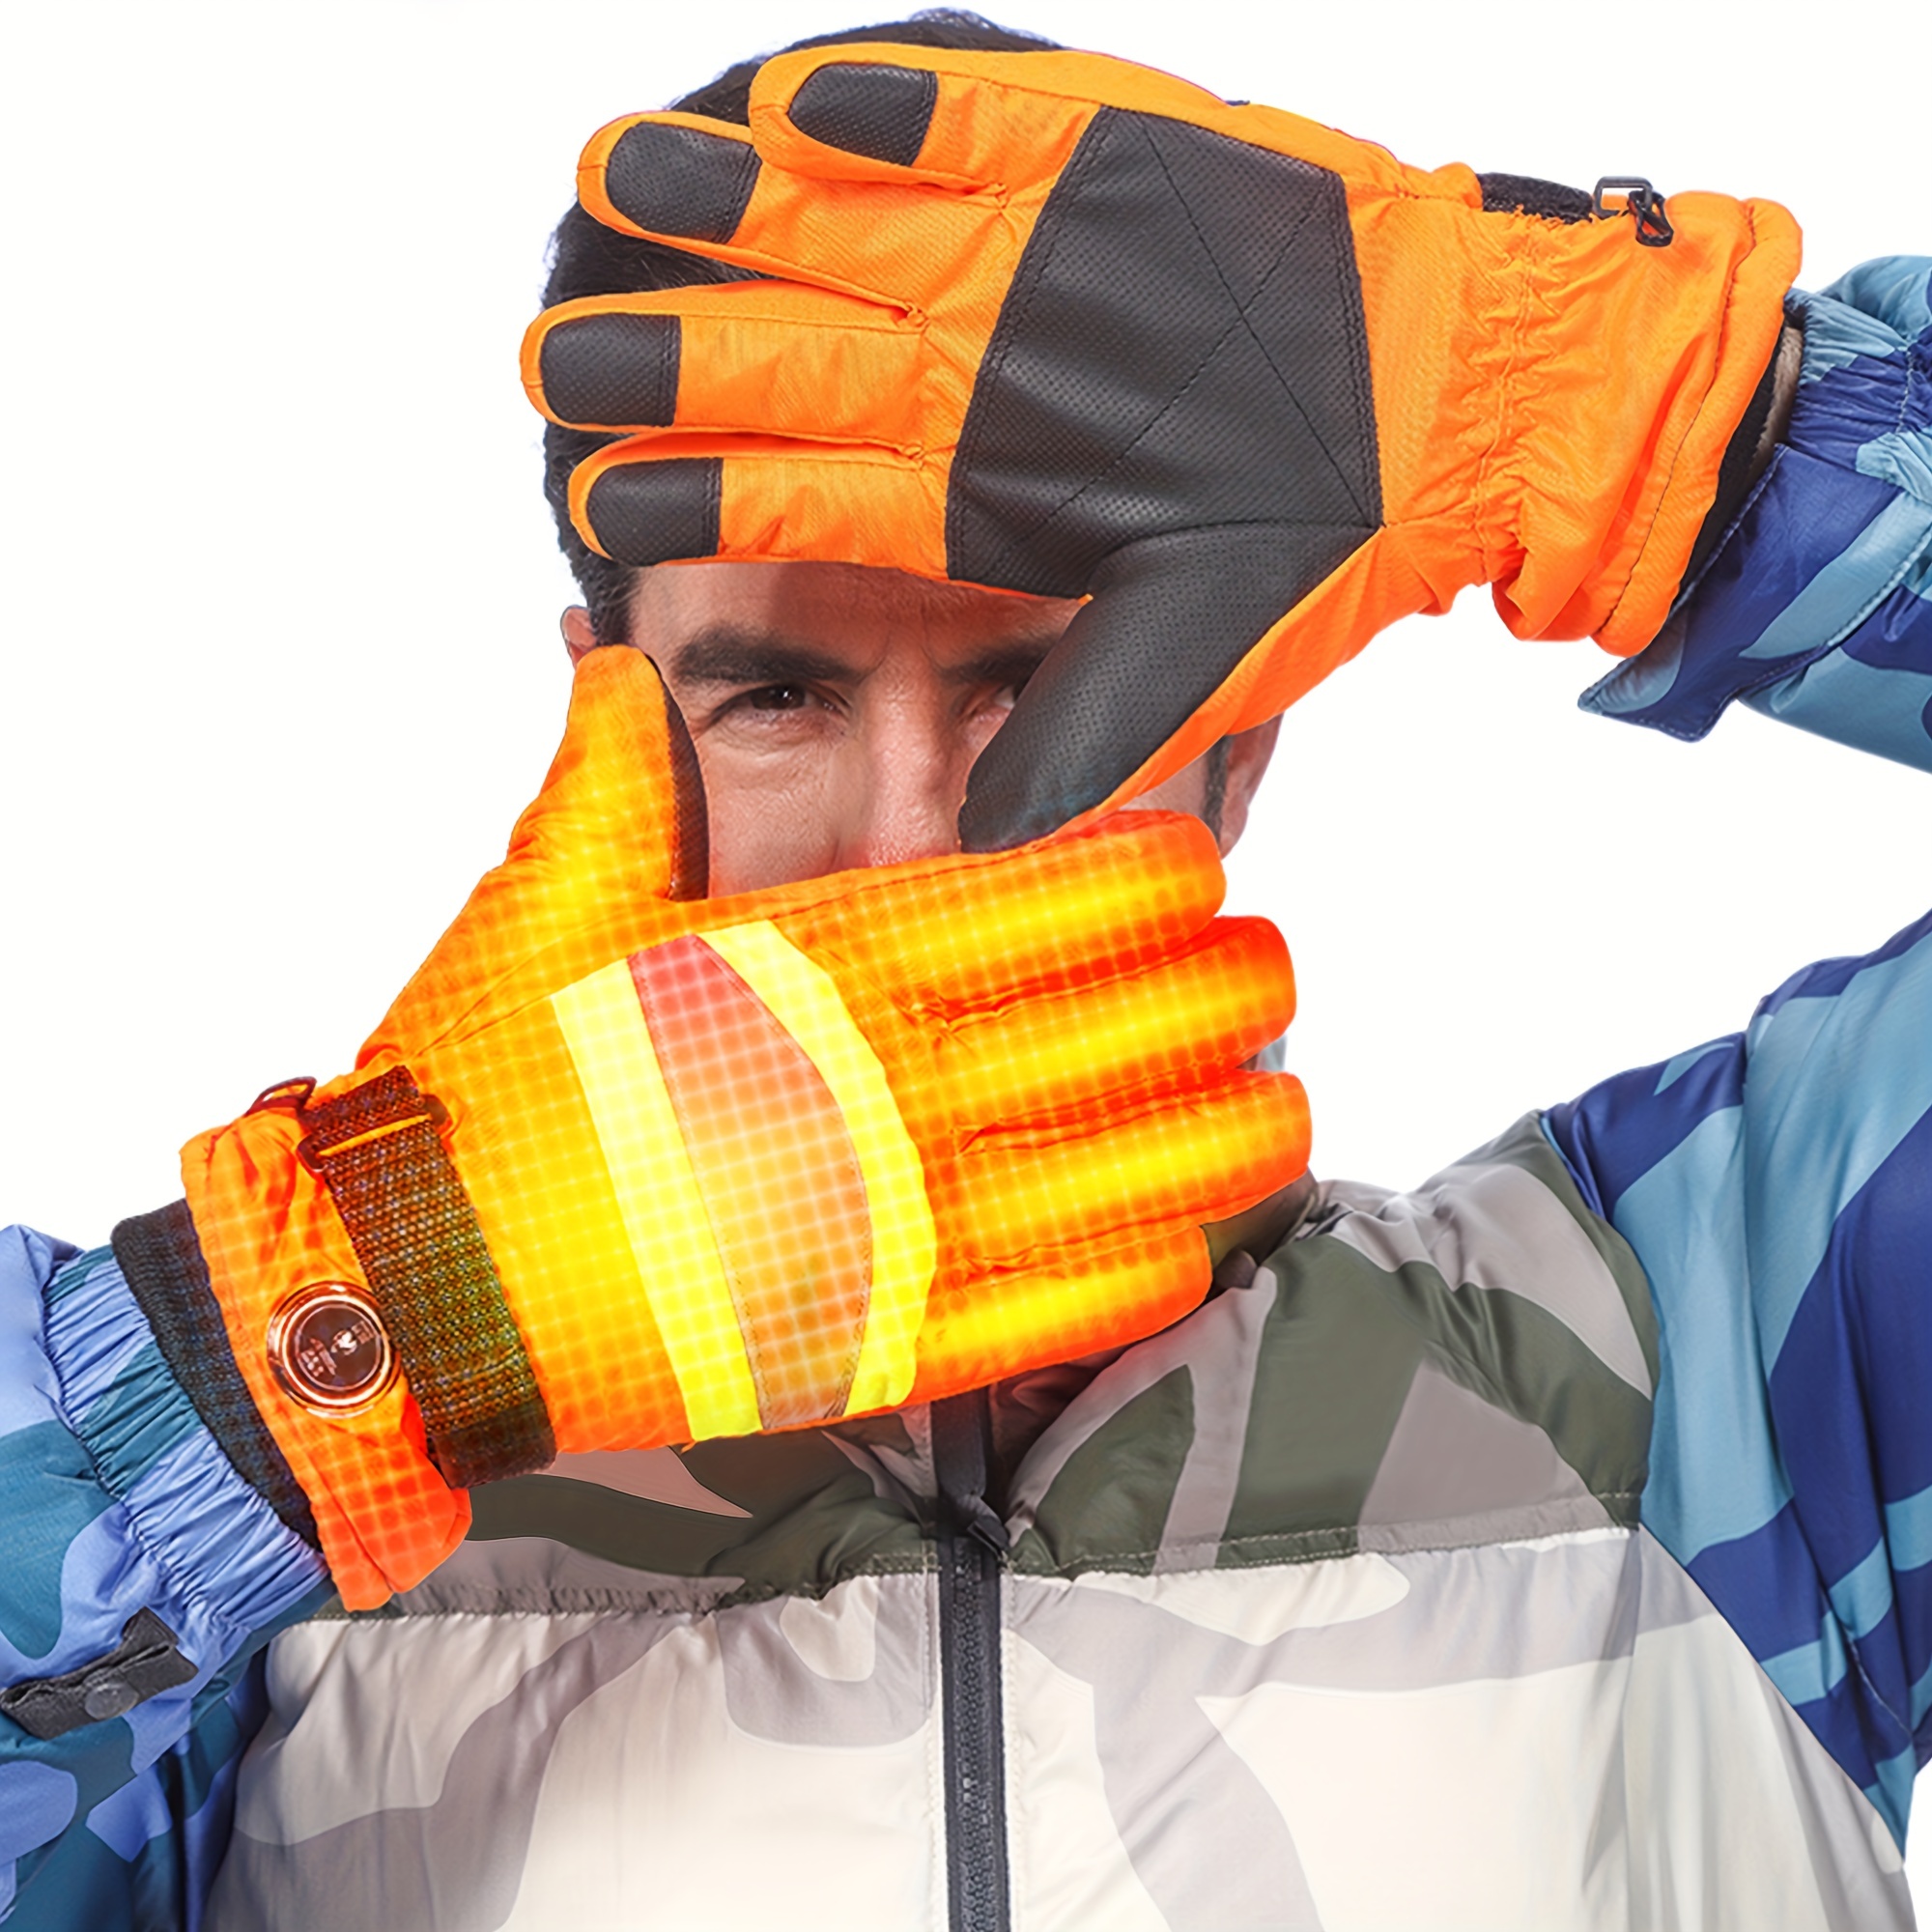 Sports Gloves 3 Gear Electric Heated 10000mAh USB Rechargeable Heating  Winter Warm Cycling Glove Motorcycle Skiing Fishing 231005 From Kang07,  $10.13